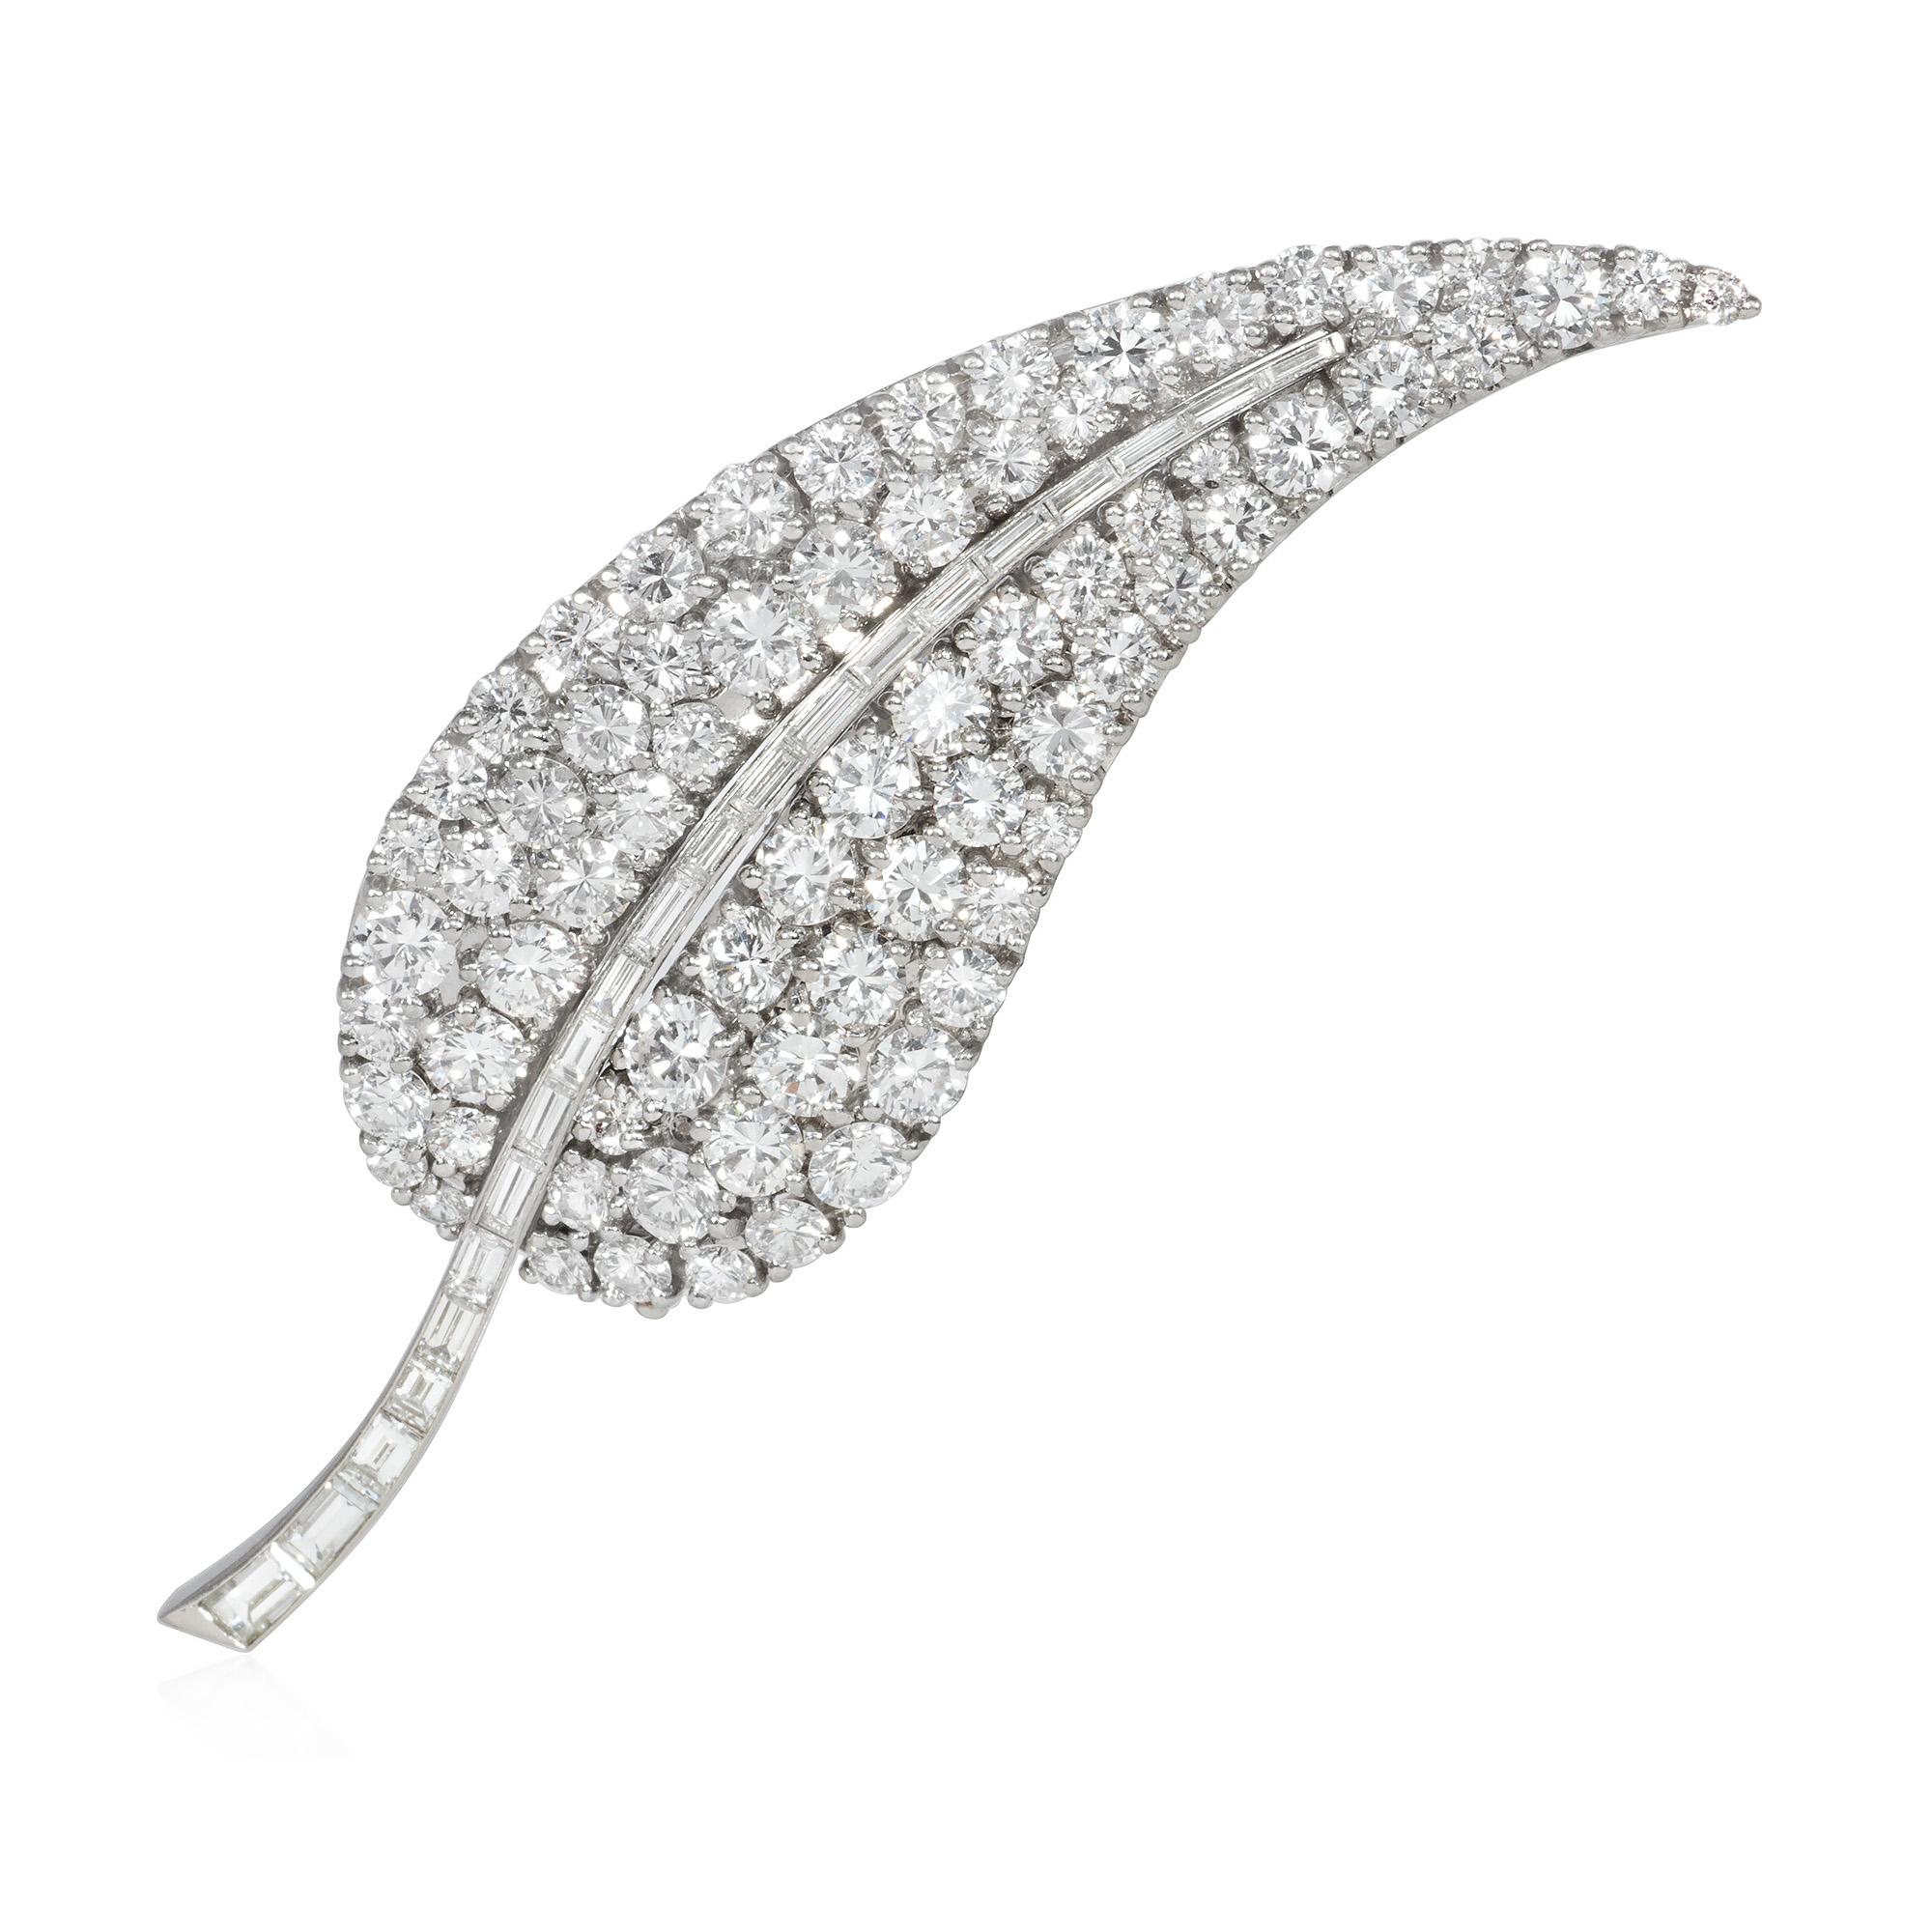 A mid-century diamond brooch in the form of a stylized leaf with three interchangeable spine inserts in sapphires, rubies, and diamonds, in platinum.  France.  Atw diamonds 6.25 cts.  See photo of complementary clip earrings, also with